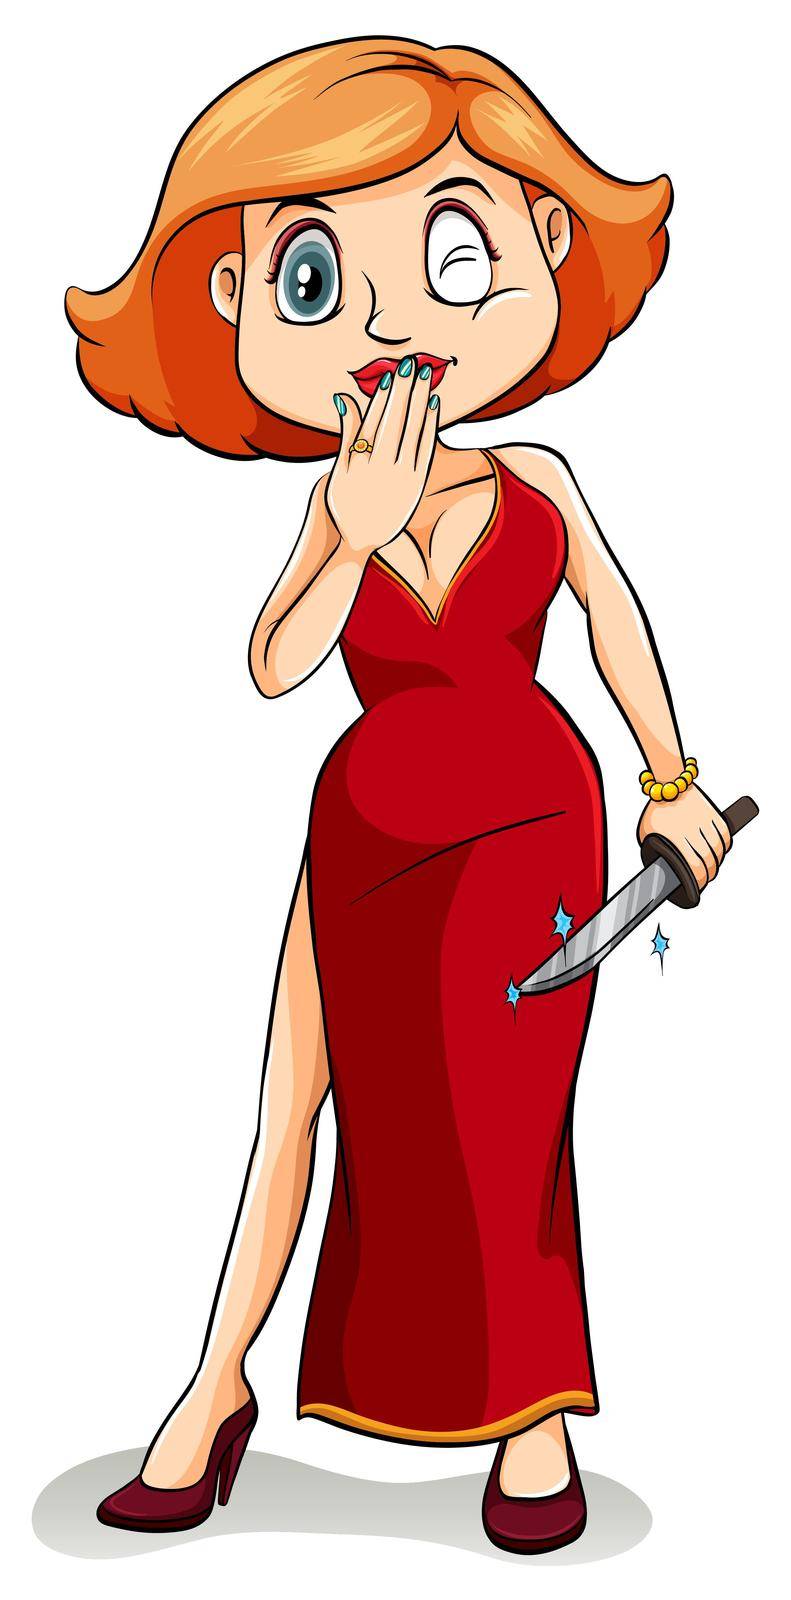 Woman in red dress with knife in her hand